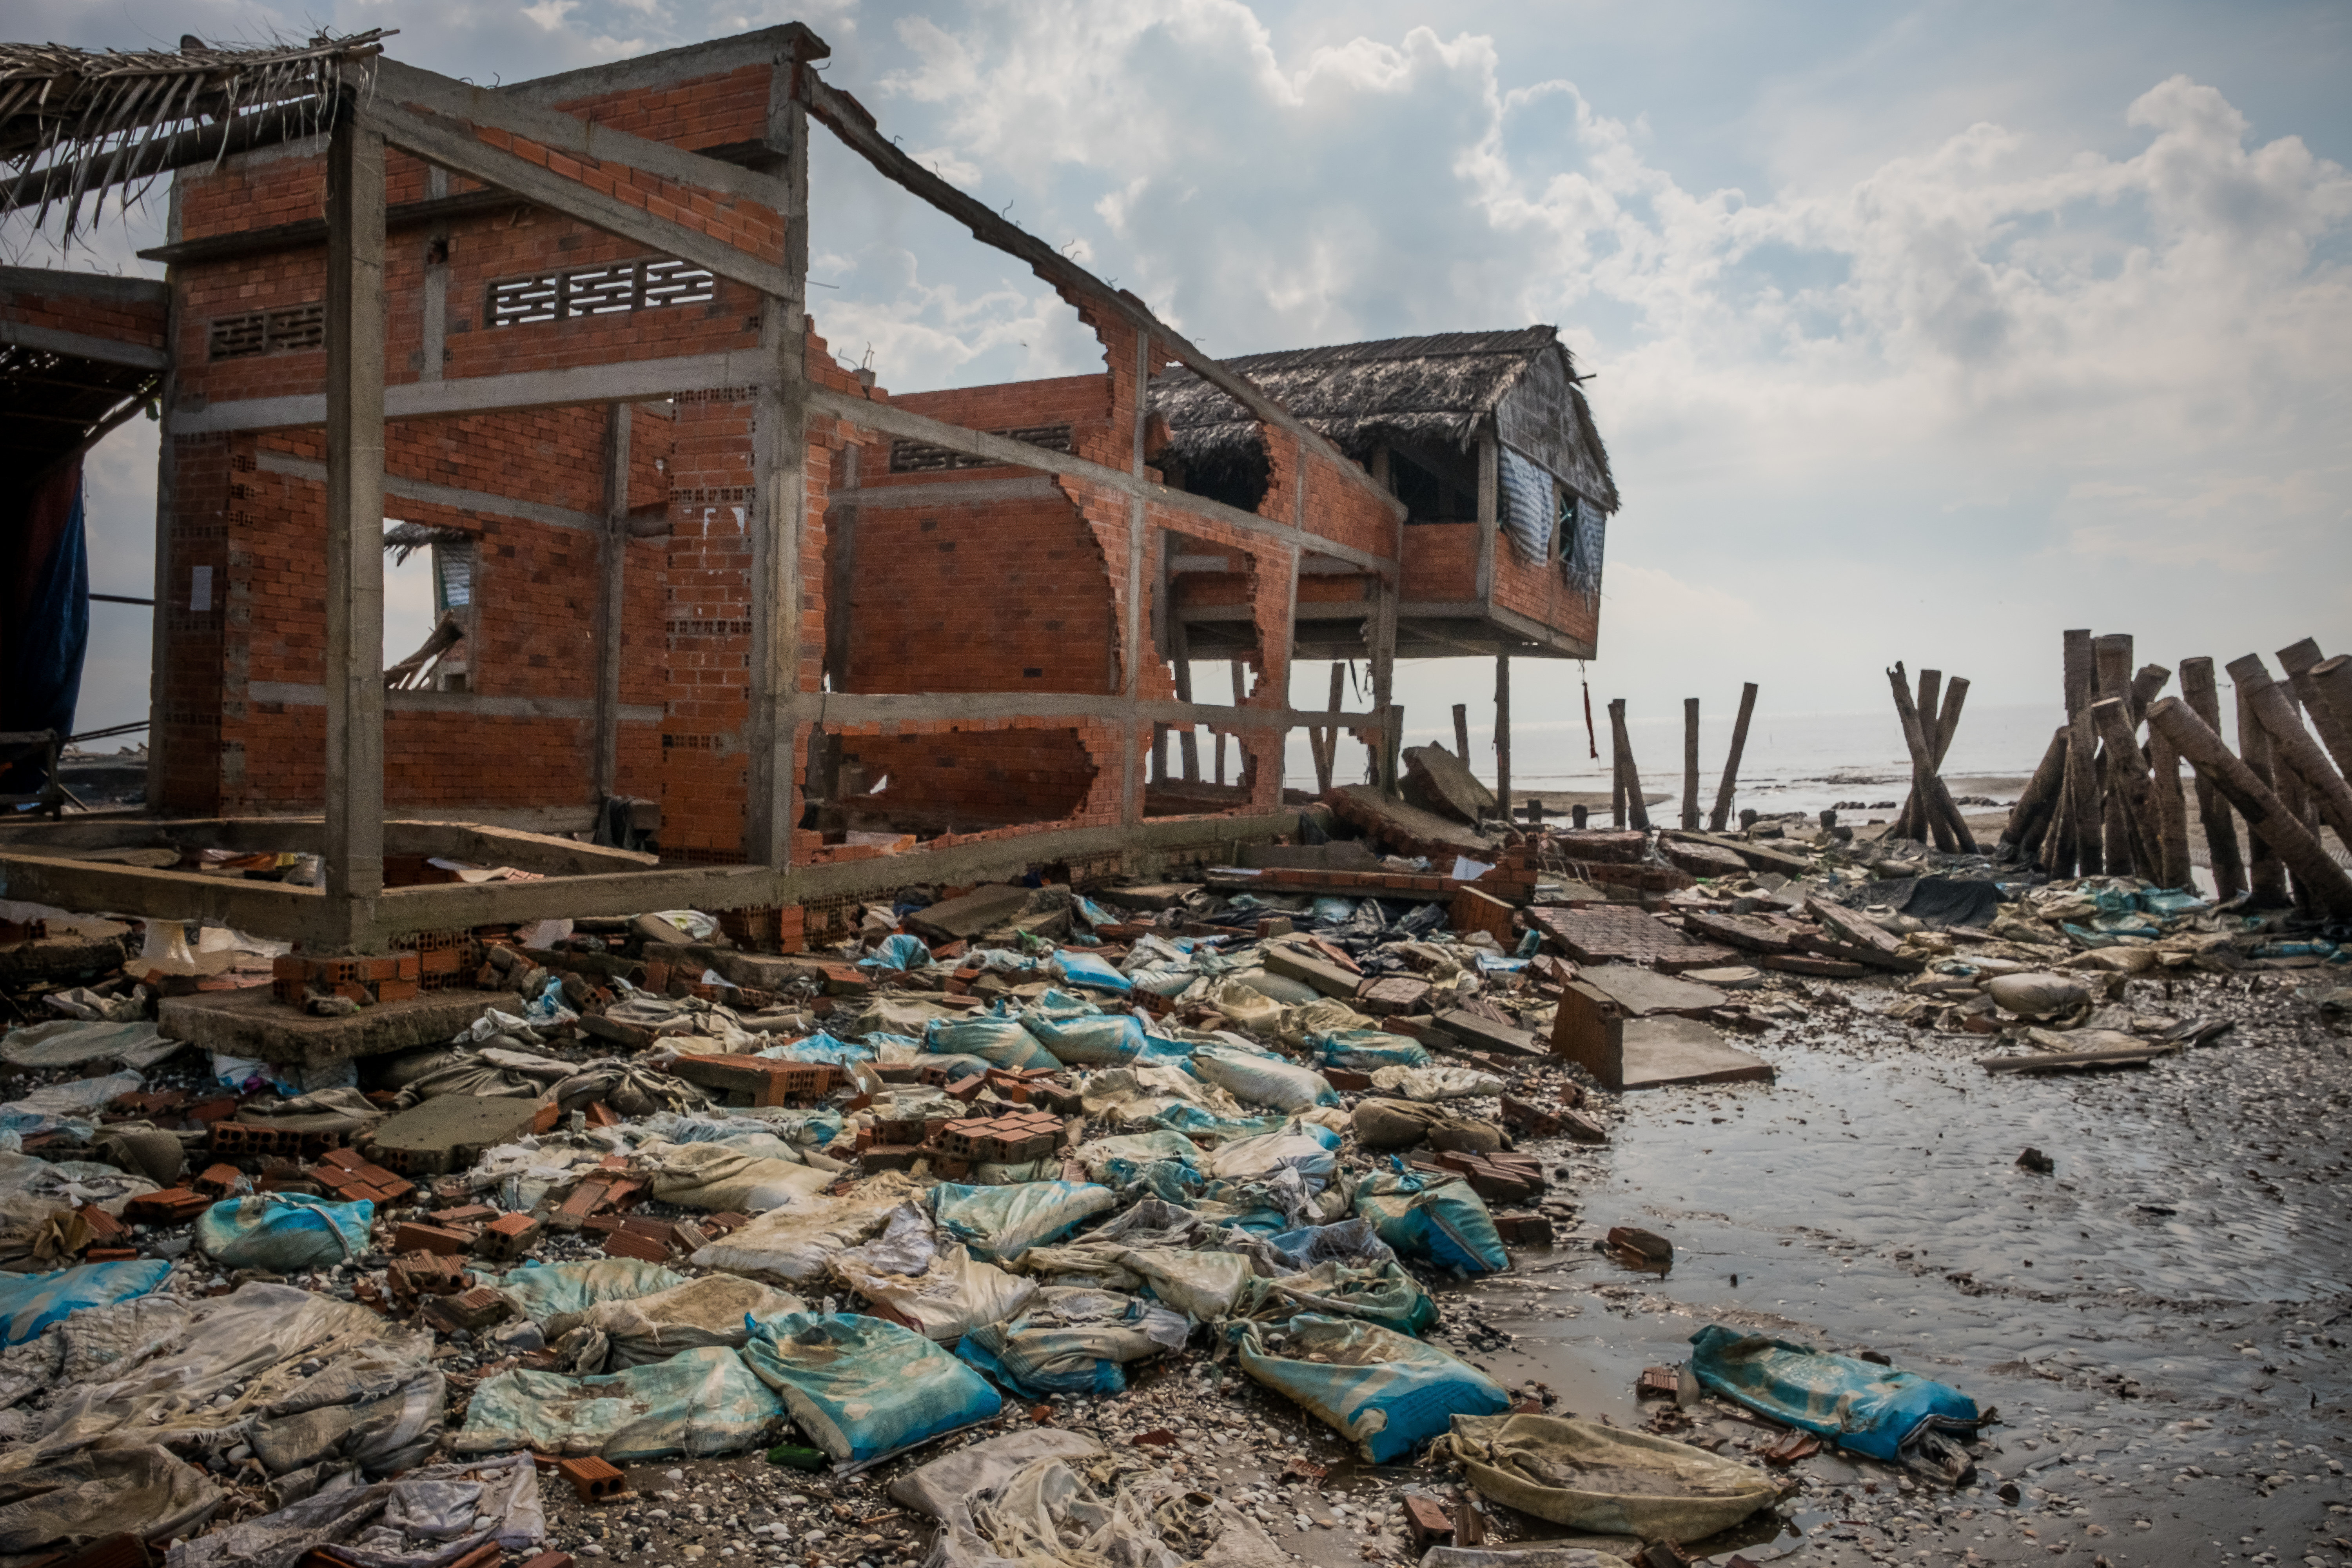 Rising sea levels, caused by climate change threaten coastal communities. Travel companies are pledging to reduce their carbon footprints to fight this. Photo :Linh Pham/Getty Images